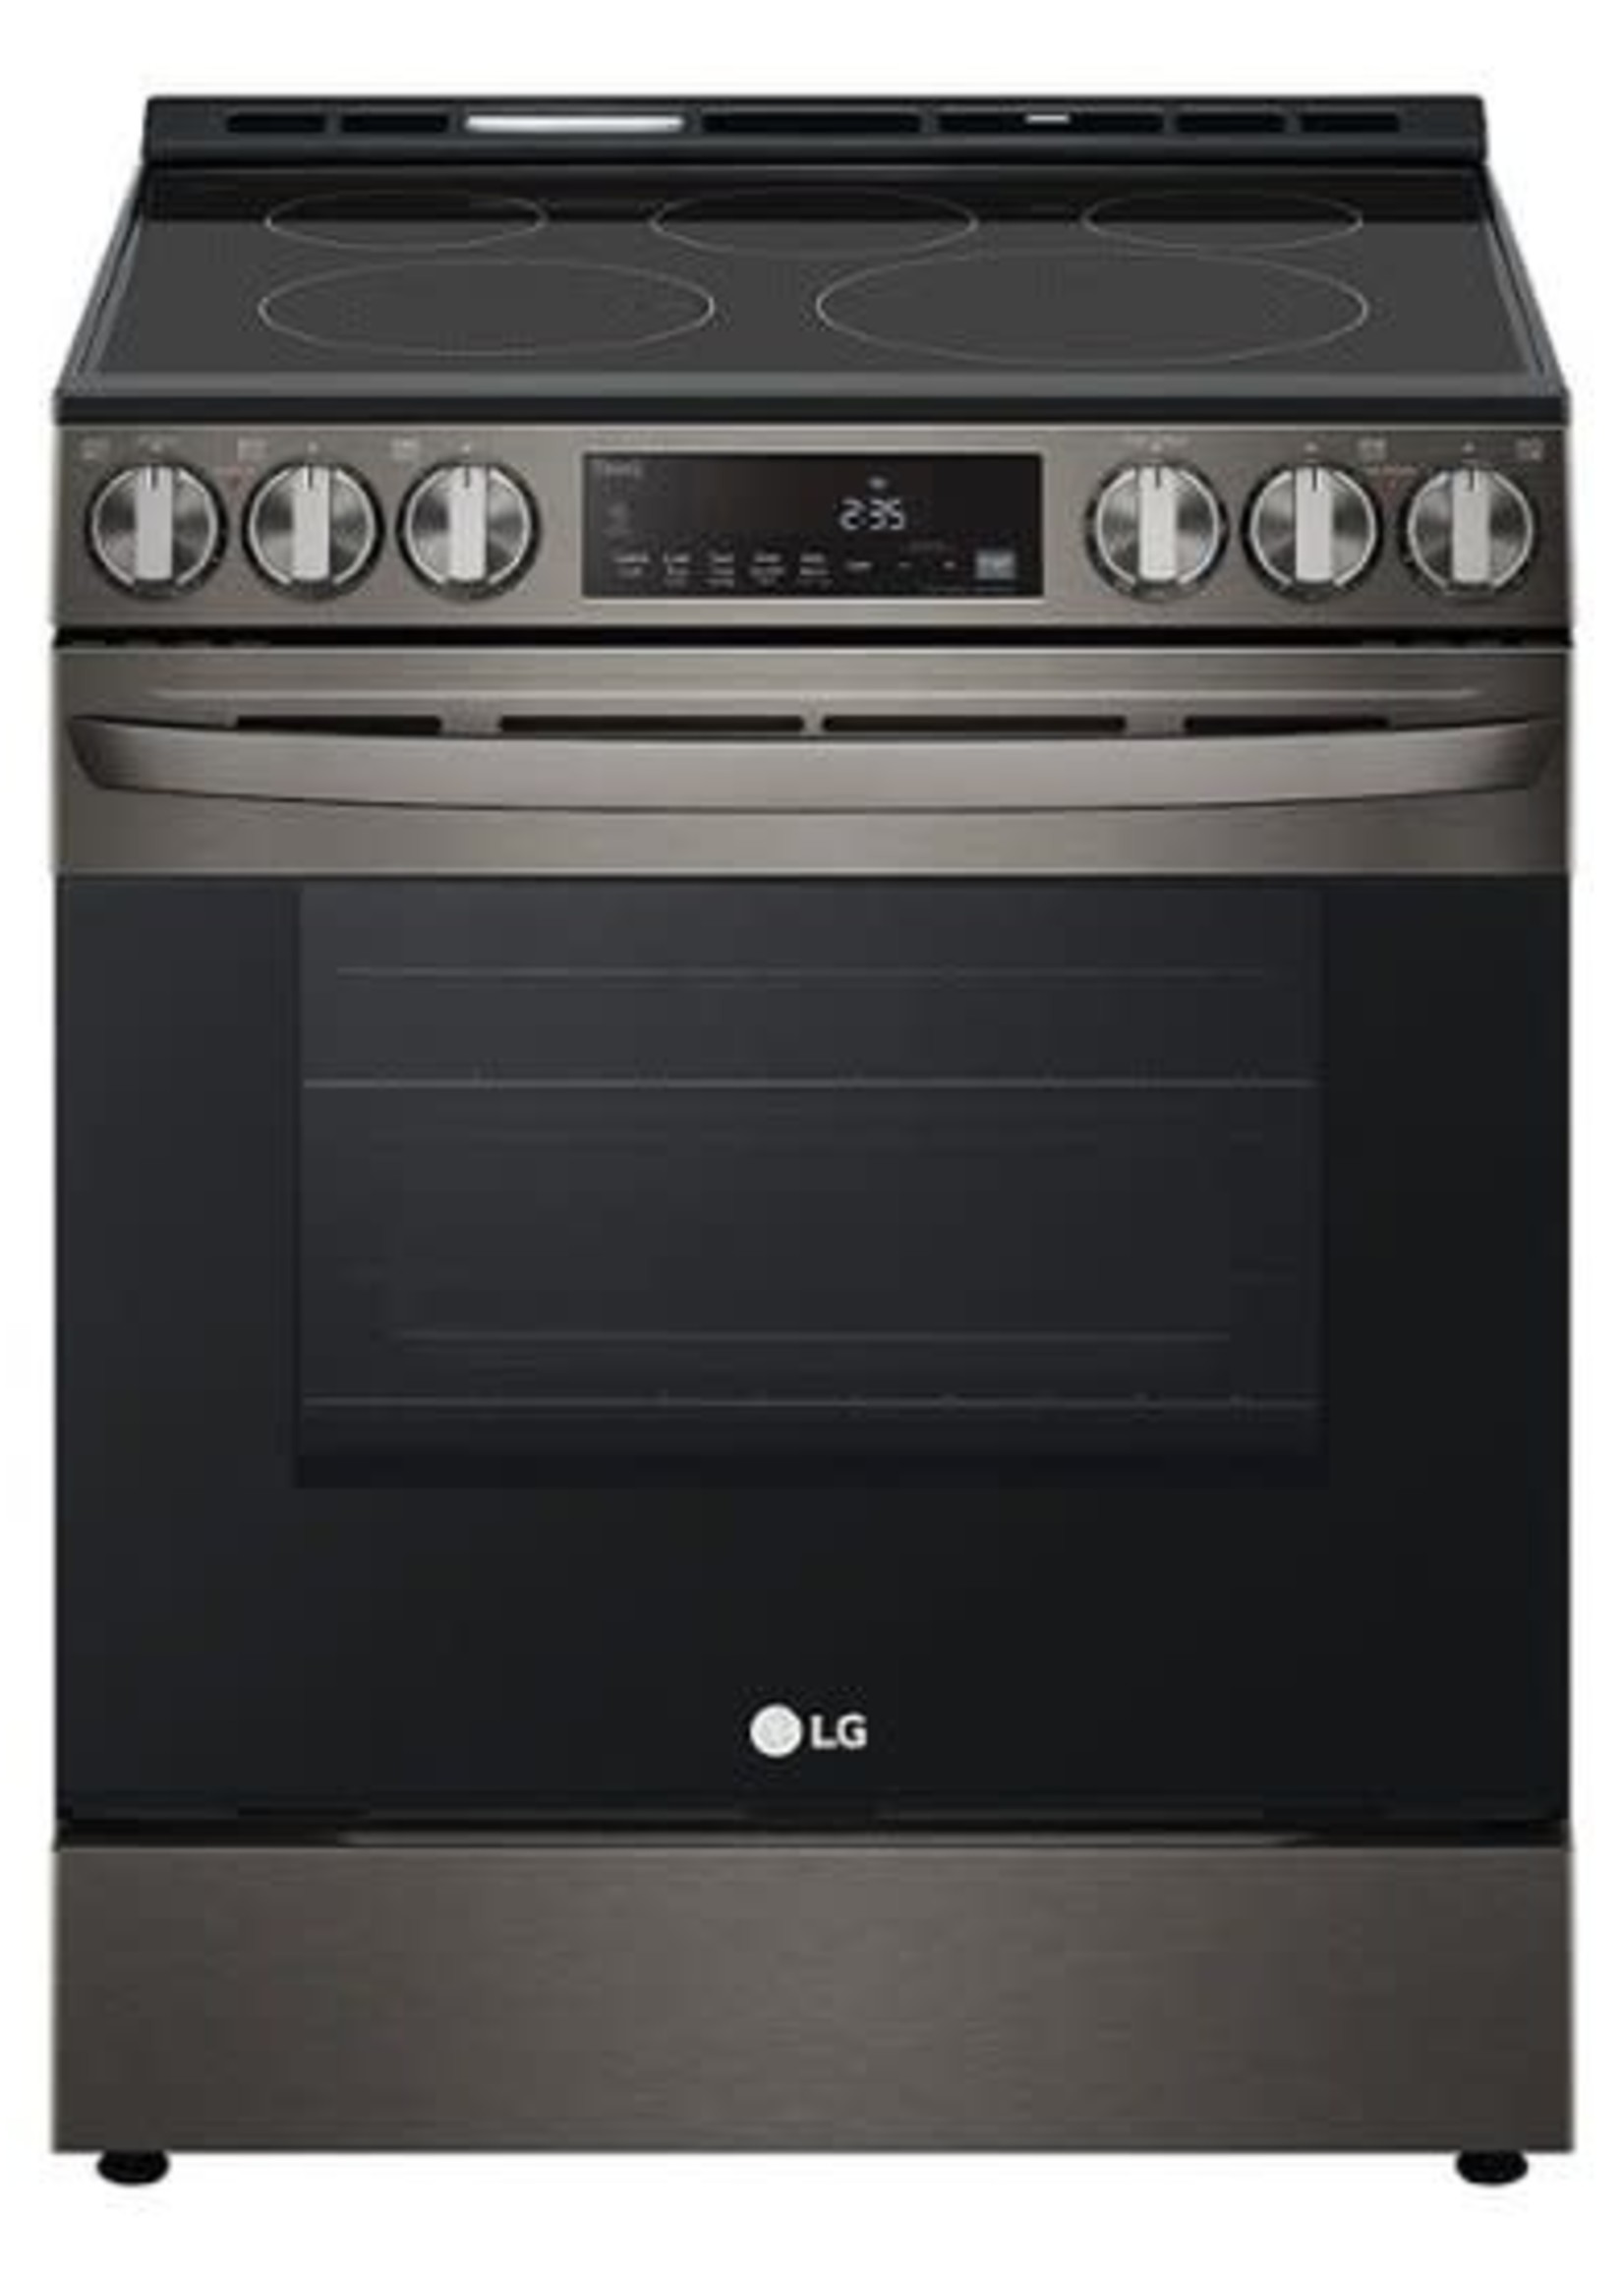 LG *LG LSEL6333D 6.3 Cu. Ft. Smart Slide-In Electric Convection Range with EasyClean, Air Fry and UltraHeat Element - Black stainless steel